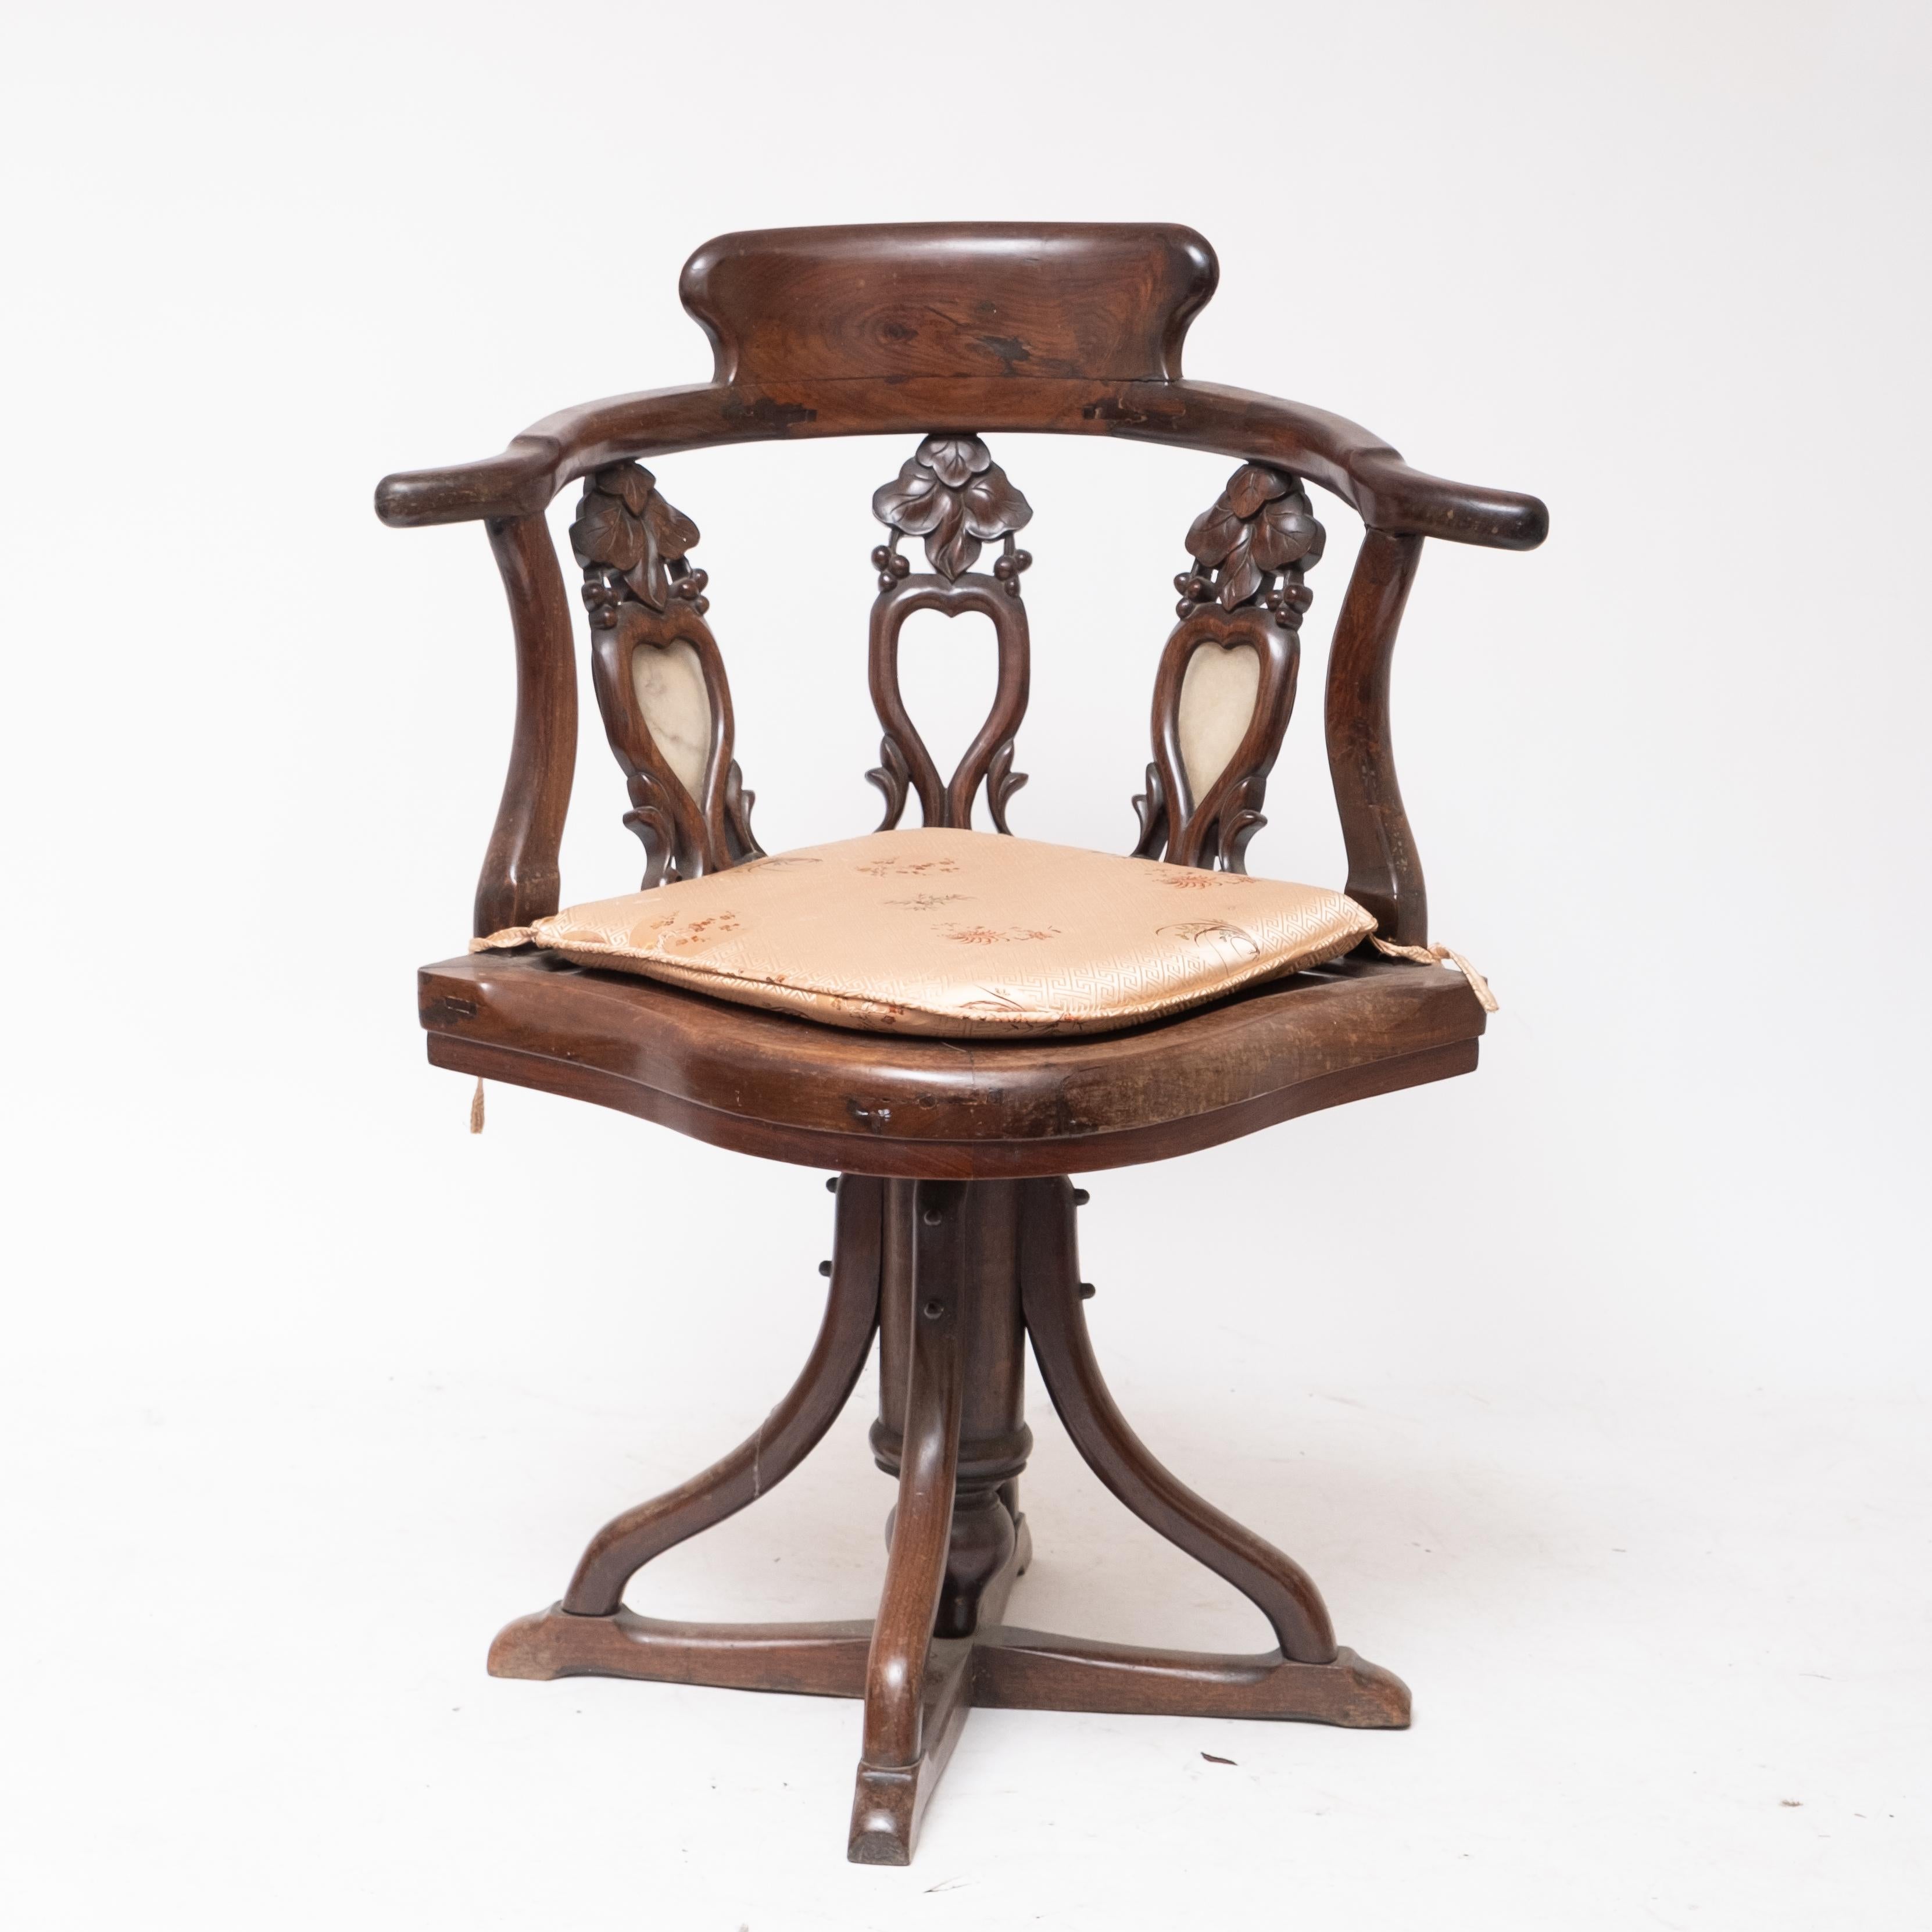 Art Nouveau Chair. The chair is a swivel adjustable desk or vanity chair, floral carved Rosewood and Marble, Probably Chinese export for European market circa late 19th Century.